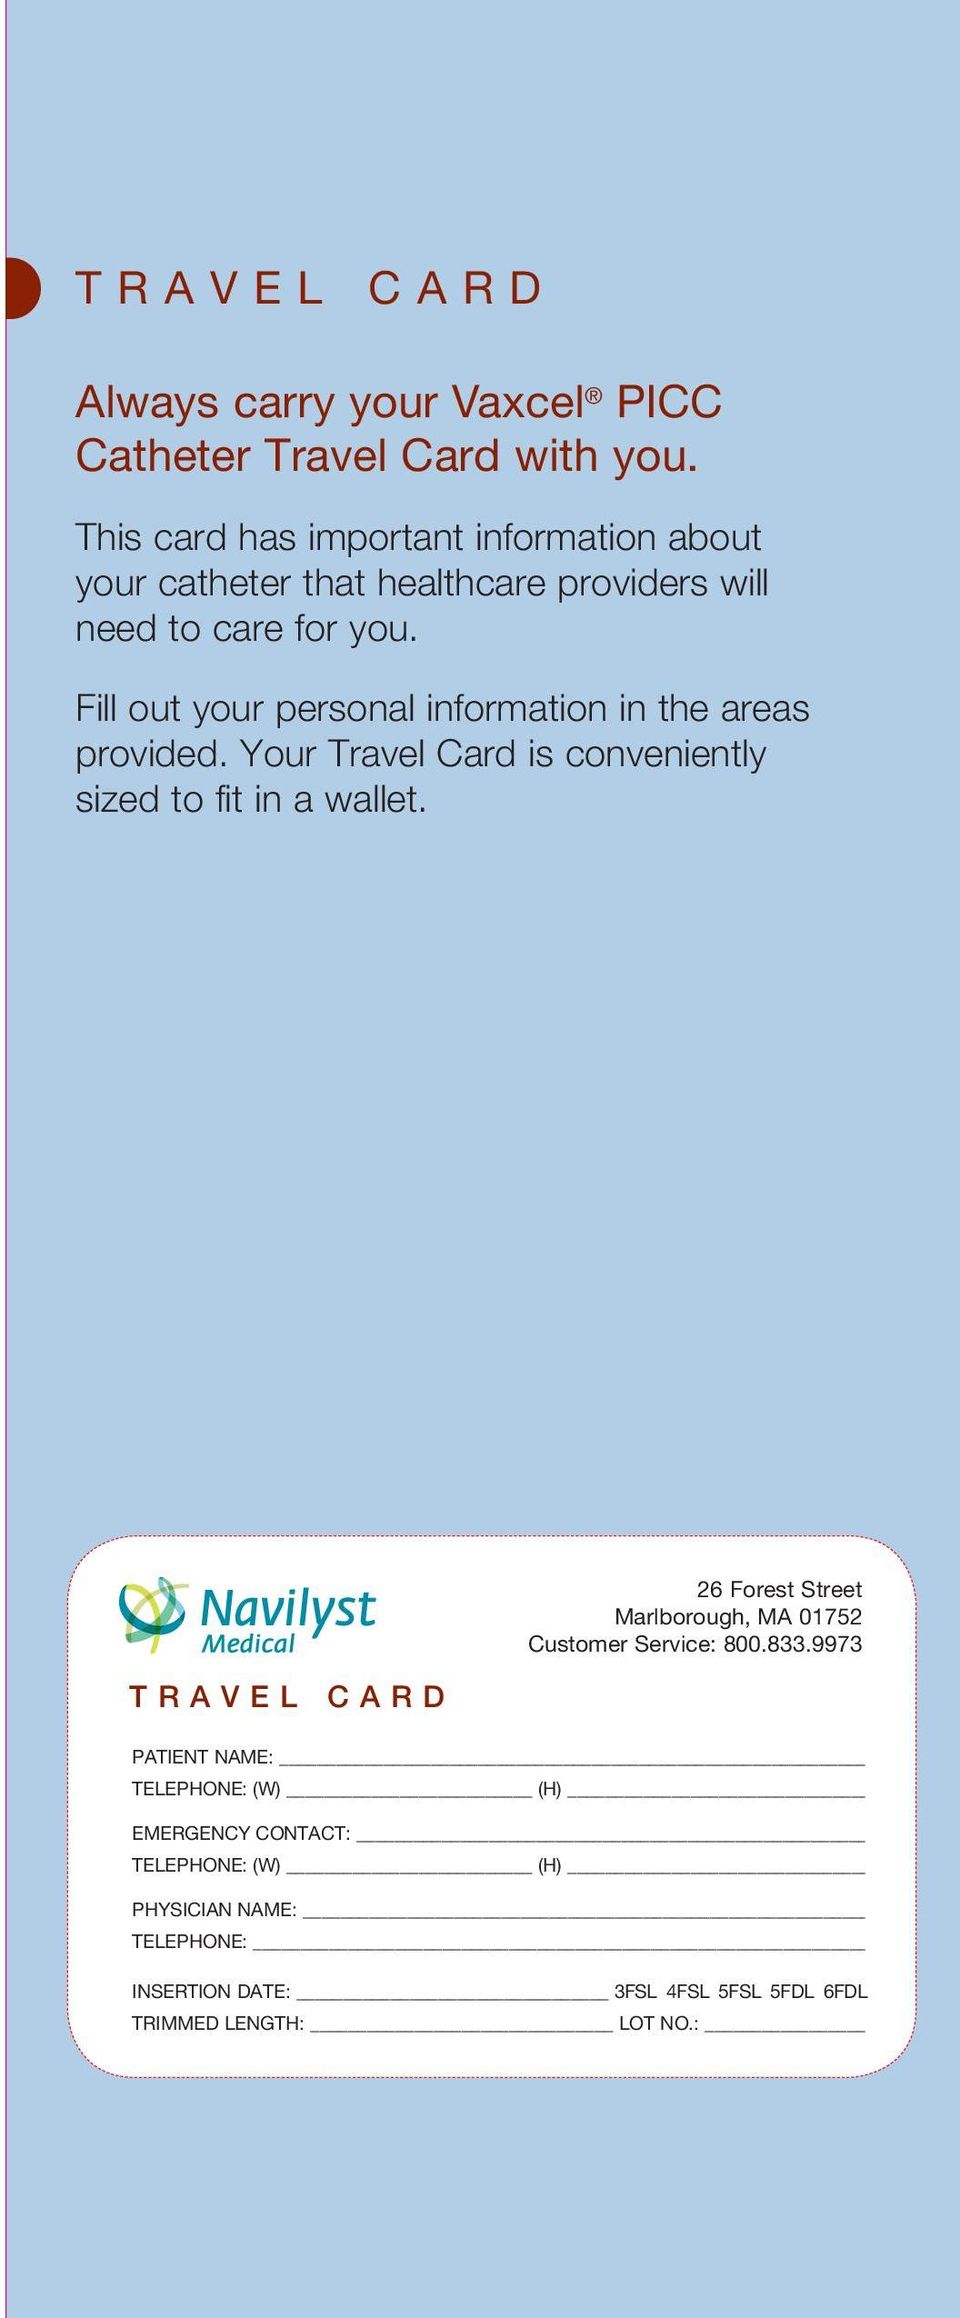 Fill out your personal information in the areas provided. Your Travel Card is conveniently sized to fit in a wallet.